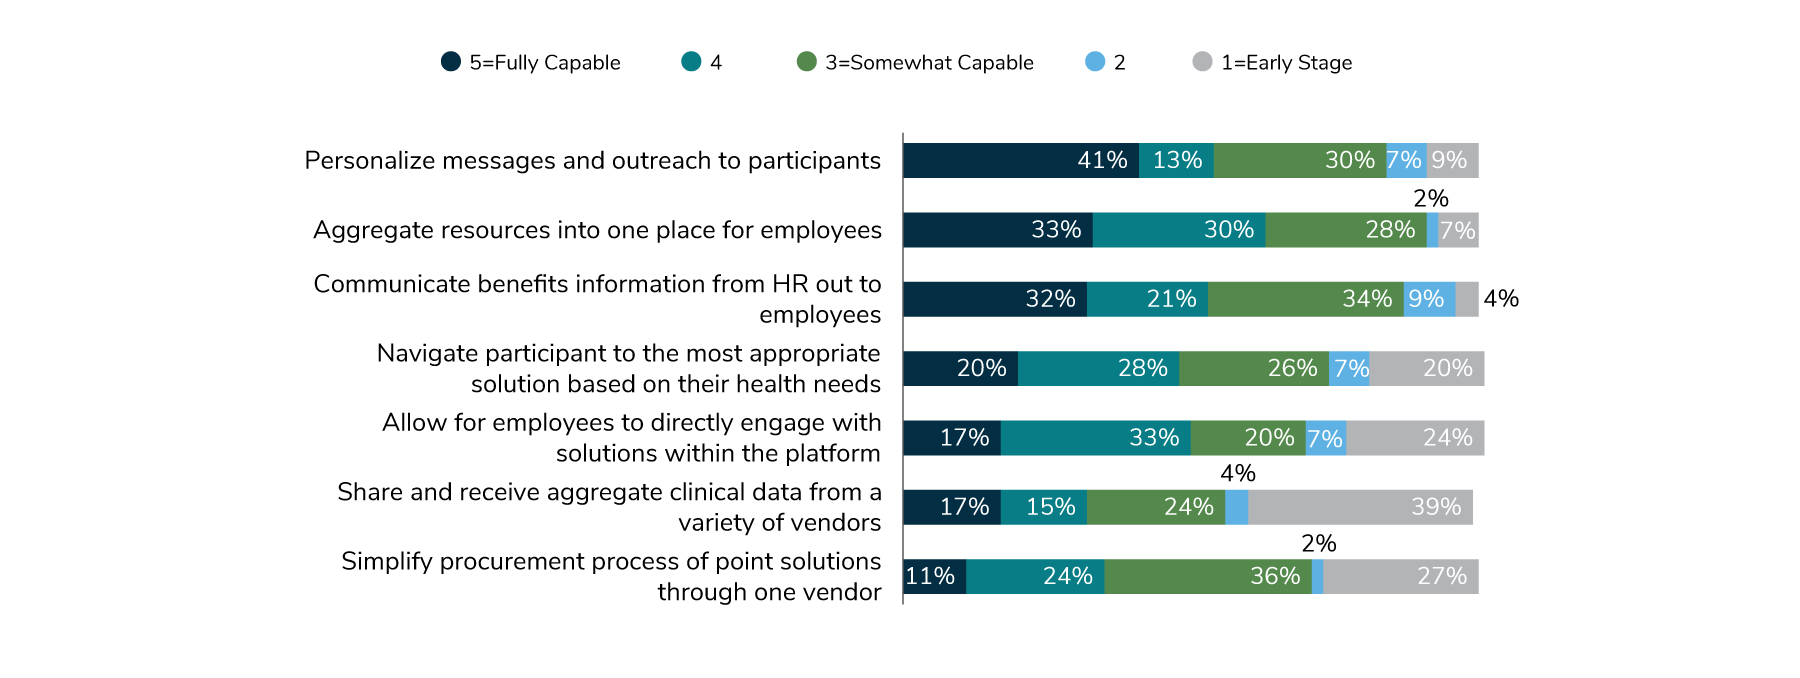 Employers believe that engagement platforms are capable or fully capable of aggregating resources (63%), personalizing messages (54%), communicating benefits information (53%), allowing employees to directly engage with solutions within the platform (50%).